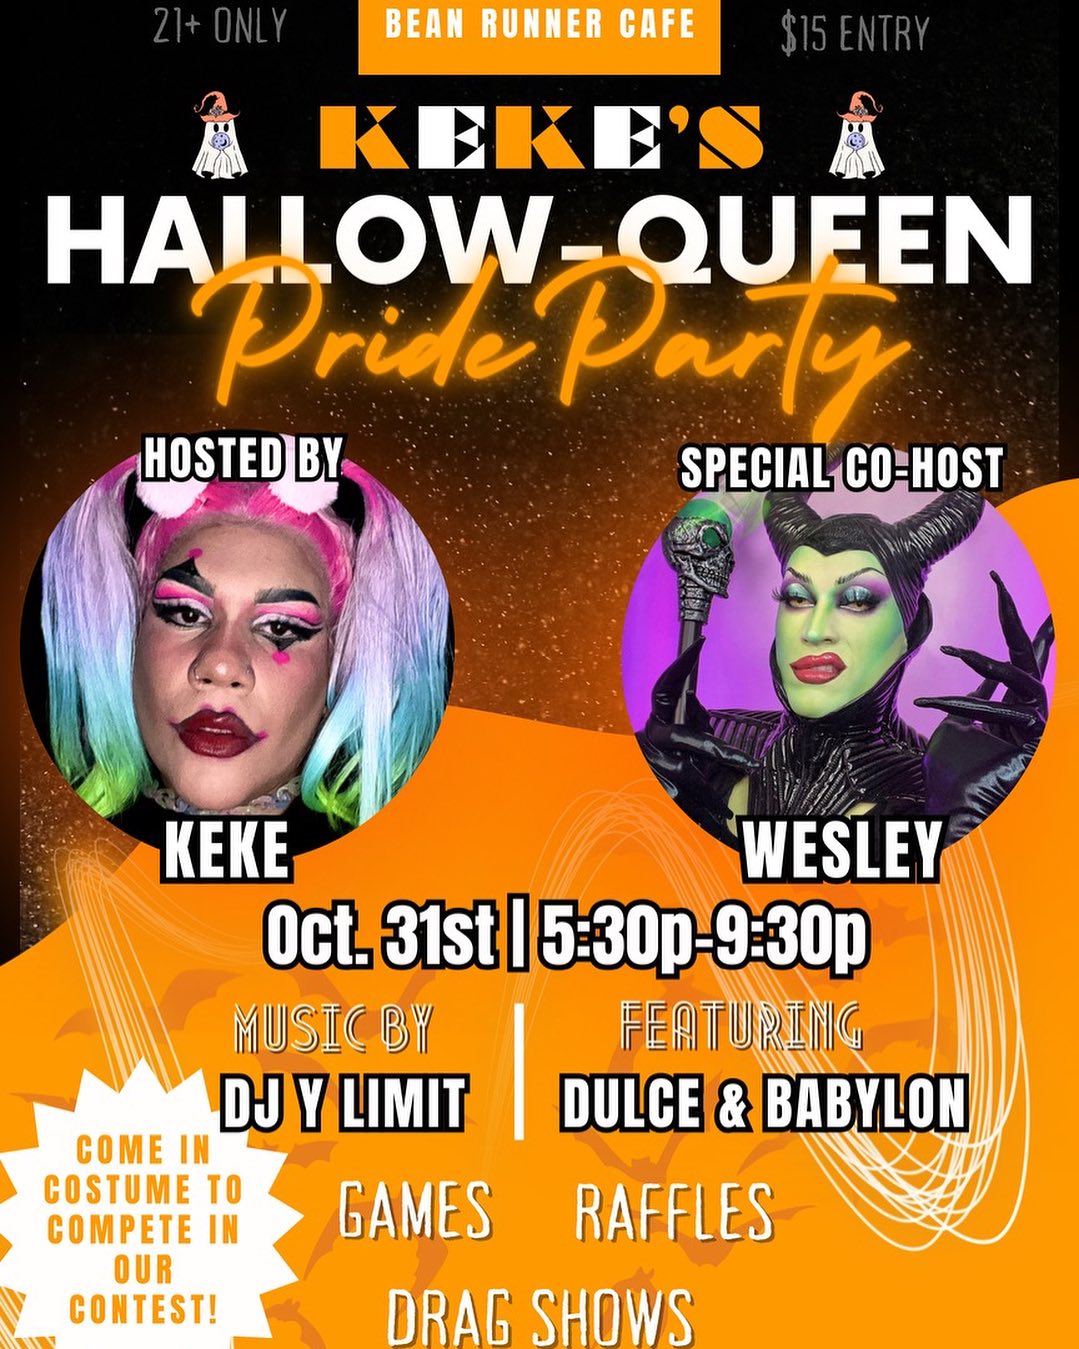 Flier for Keke's Hallow-Queen Pride Party at Bean Runner Cafe